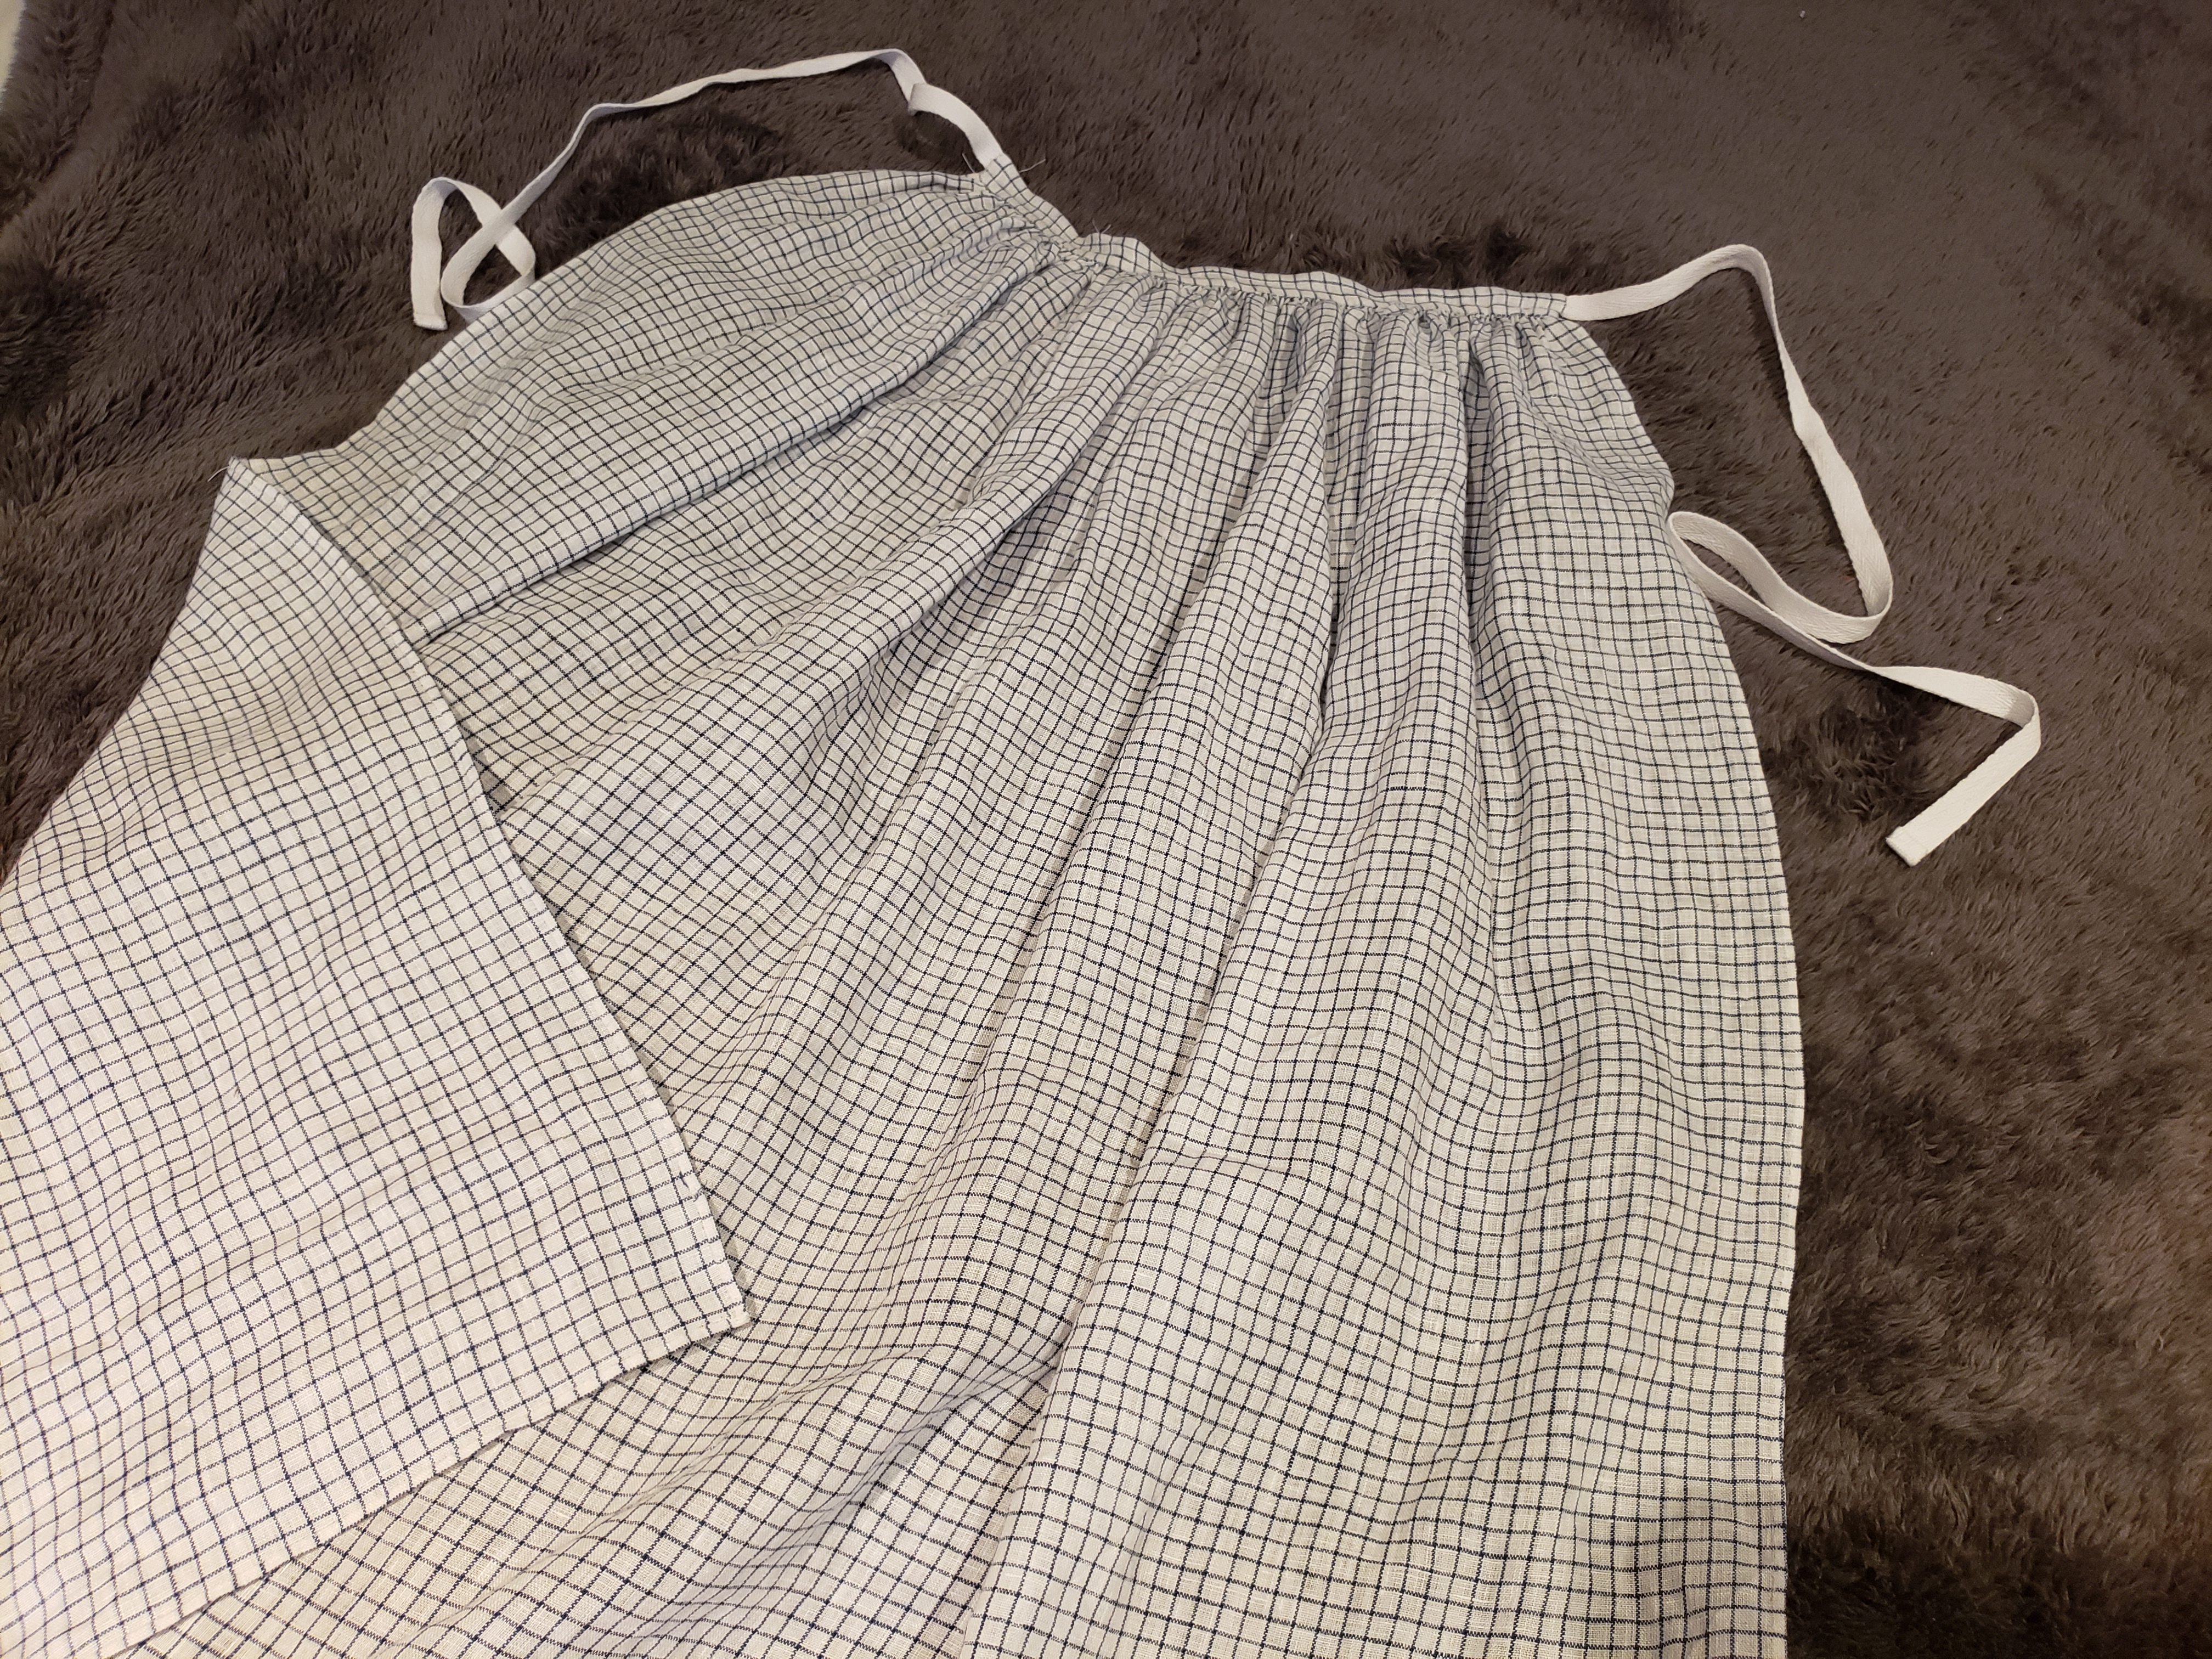 Handsewn Blue Checked Linen Apron - 18th Century & Early 19th Century Apron